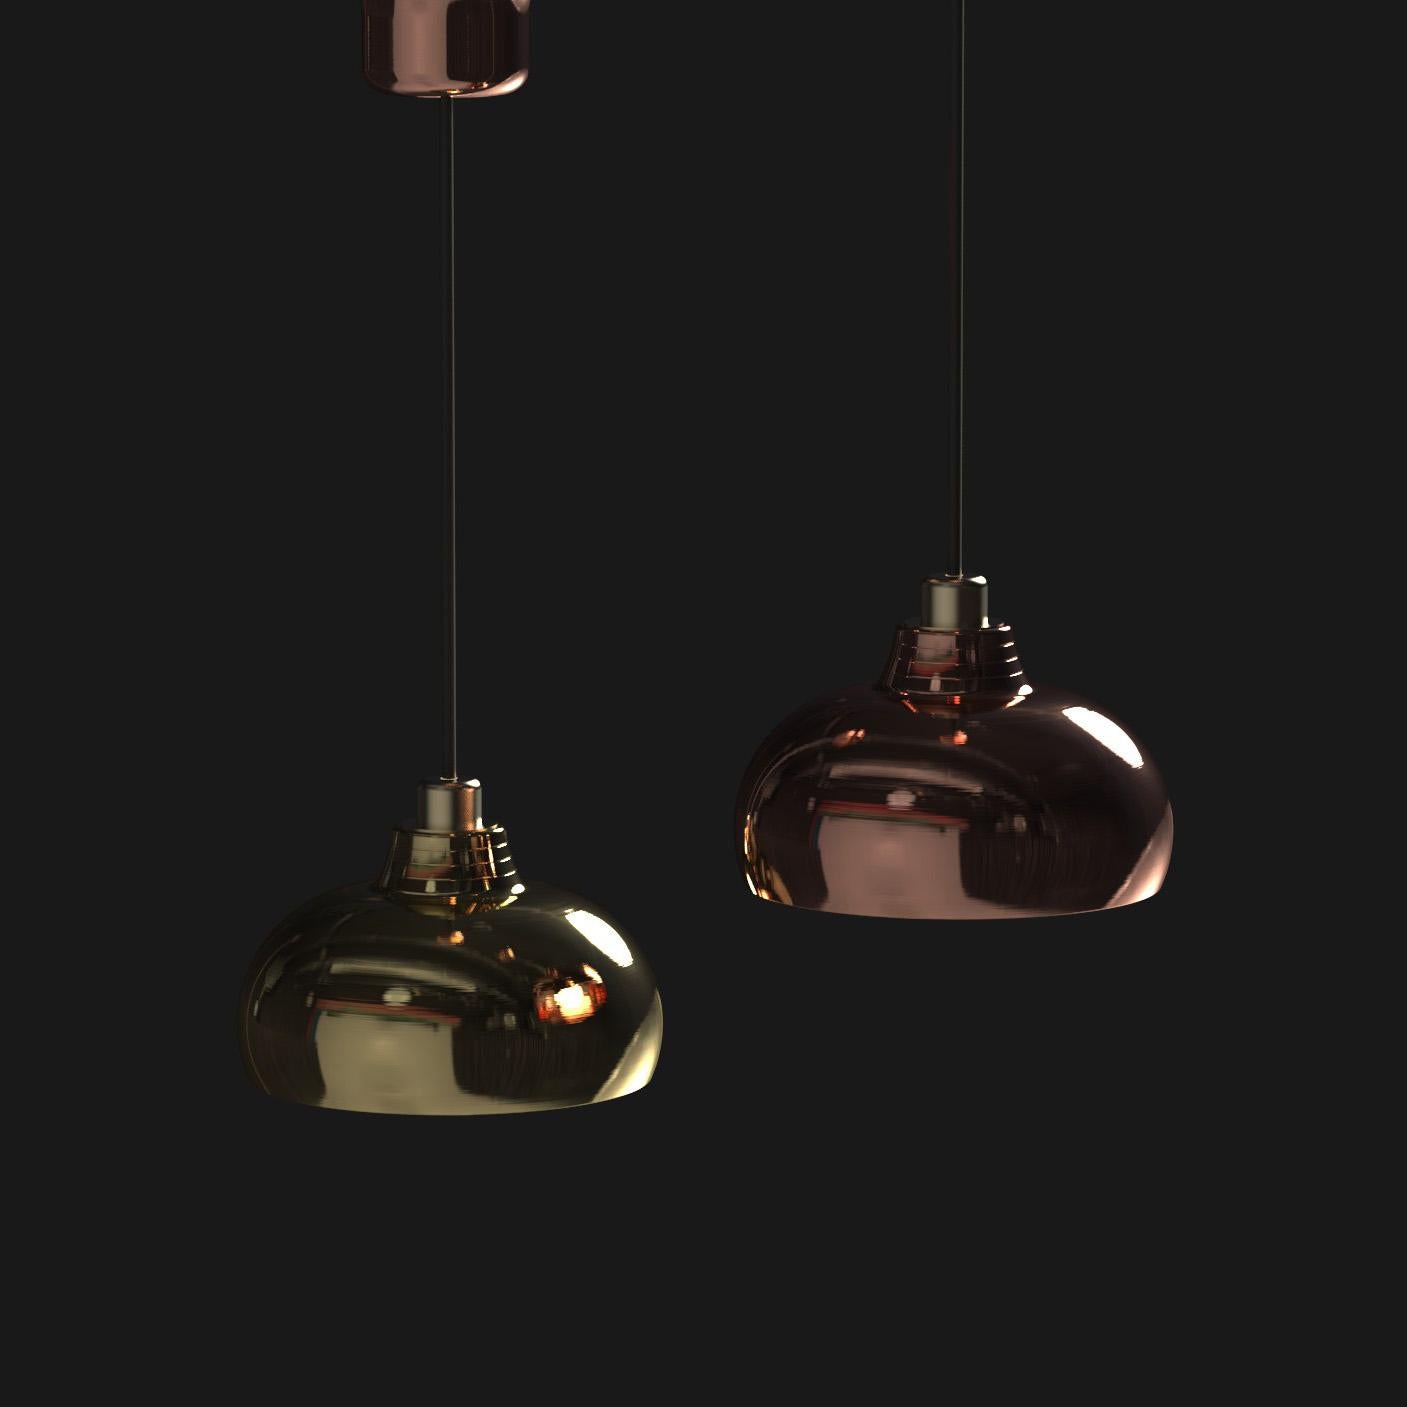 Discover the pinnacle of craftsmanship and beauty with our Genuine Copper Half-Sphere
Ceiling Light, a masterpiece of light that will illuminate your space. Handcrafted with unparalleled
expertise, this fixture blends the art of metal spinning with